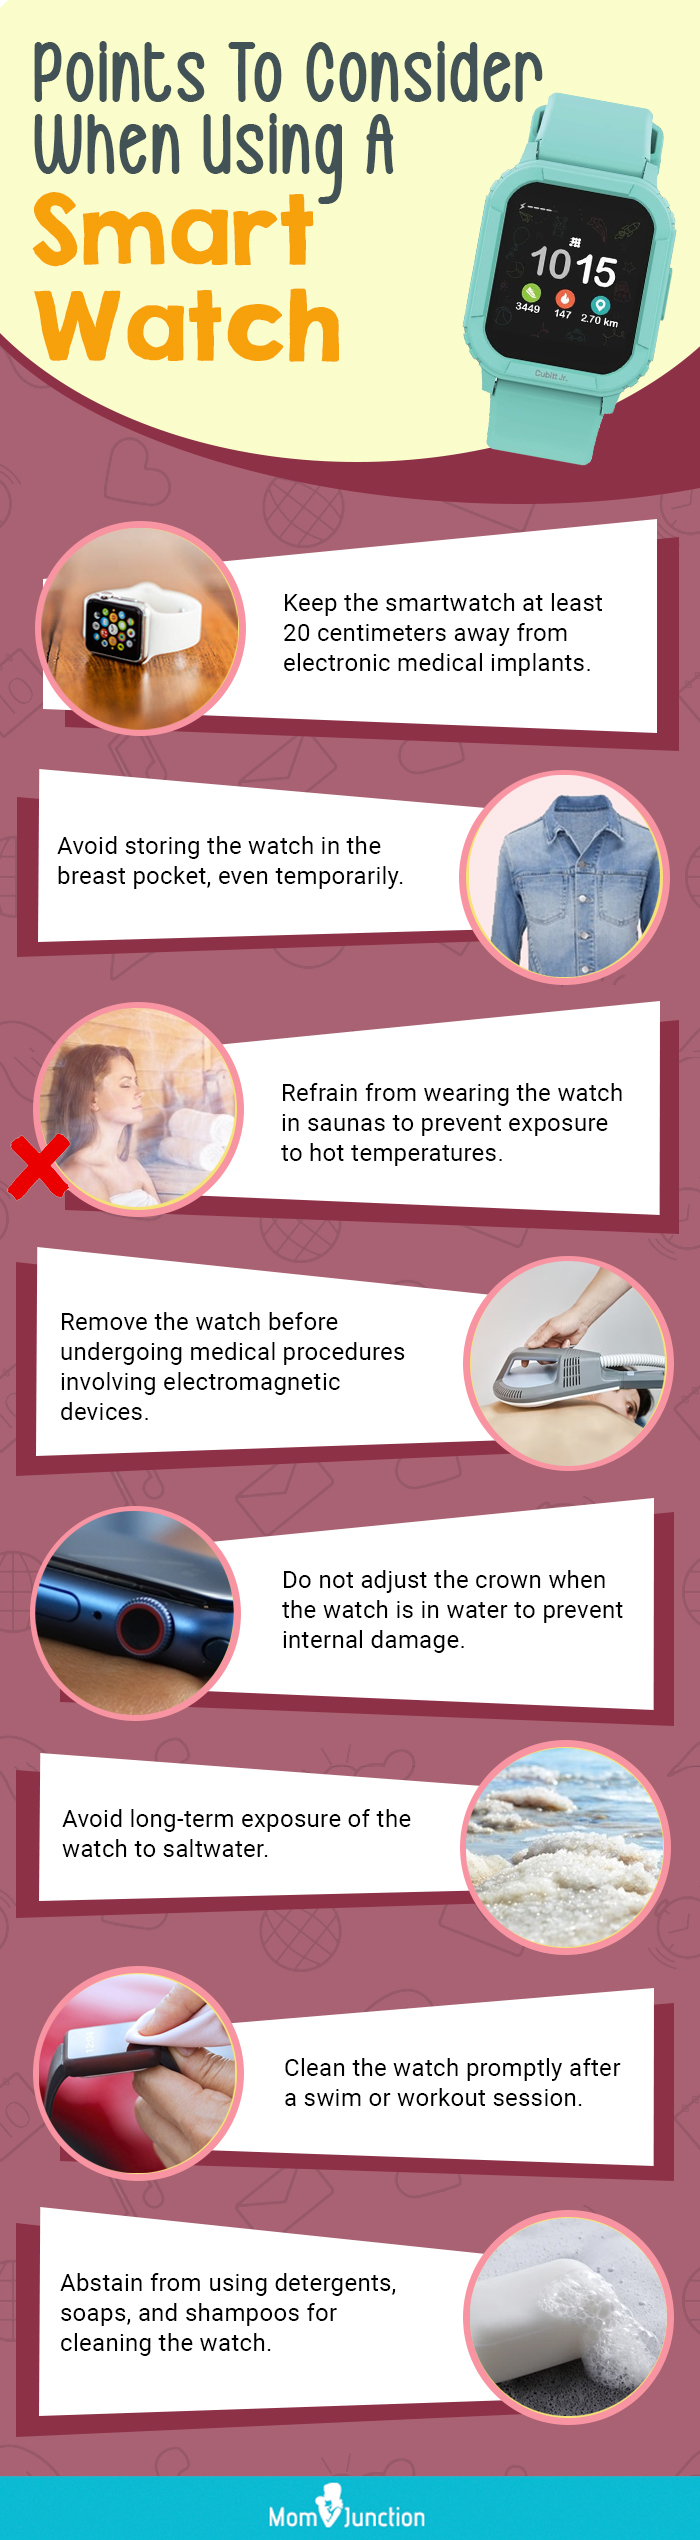 Points To Consider When Using A Smart Watch (infographic)